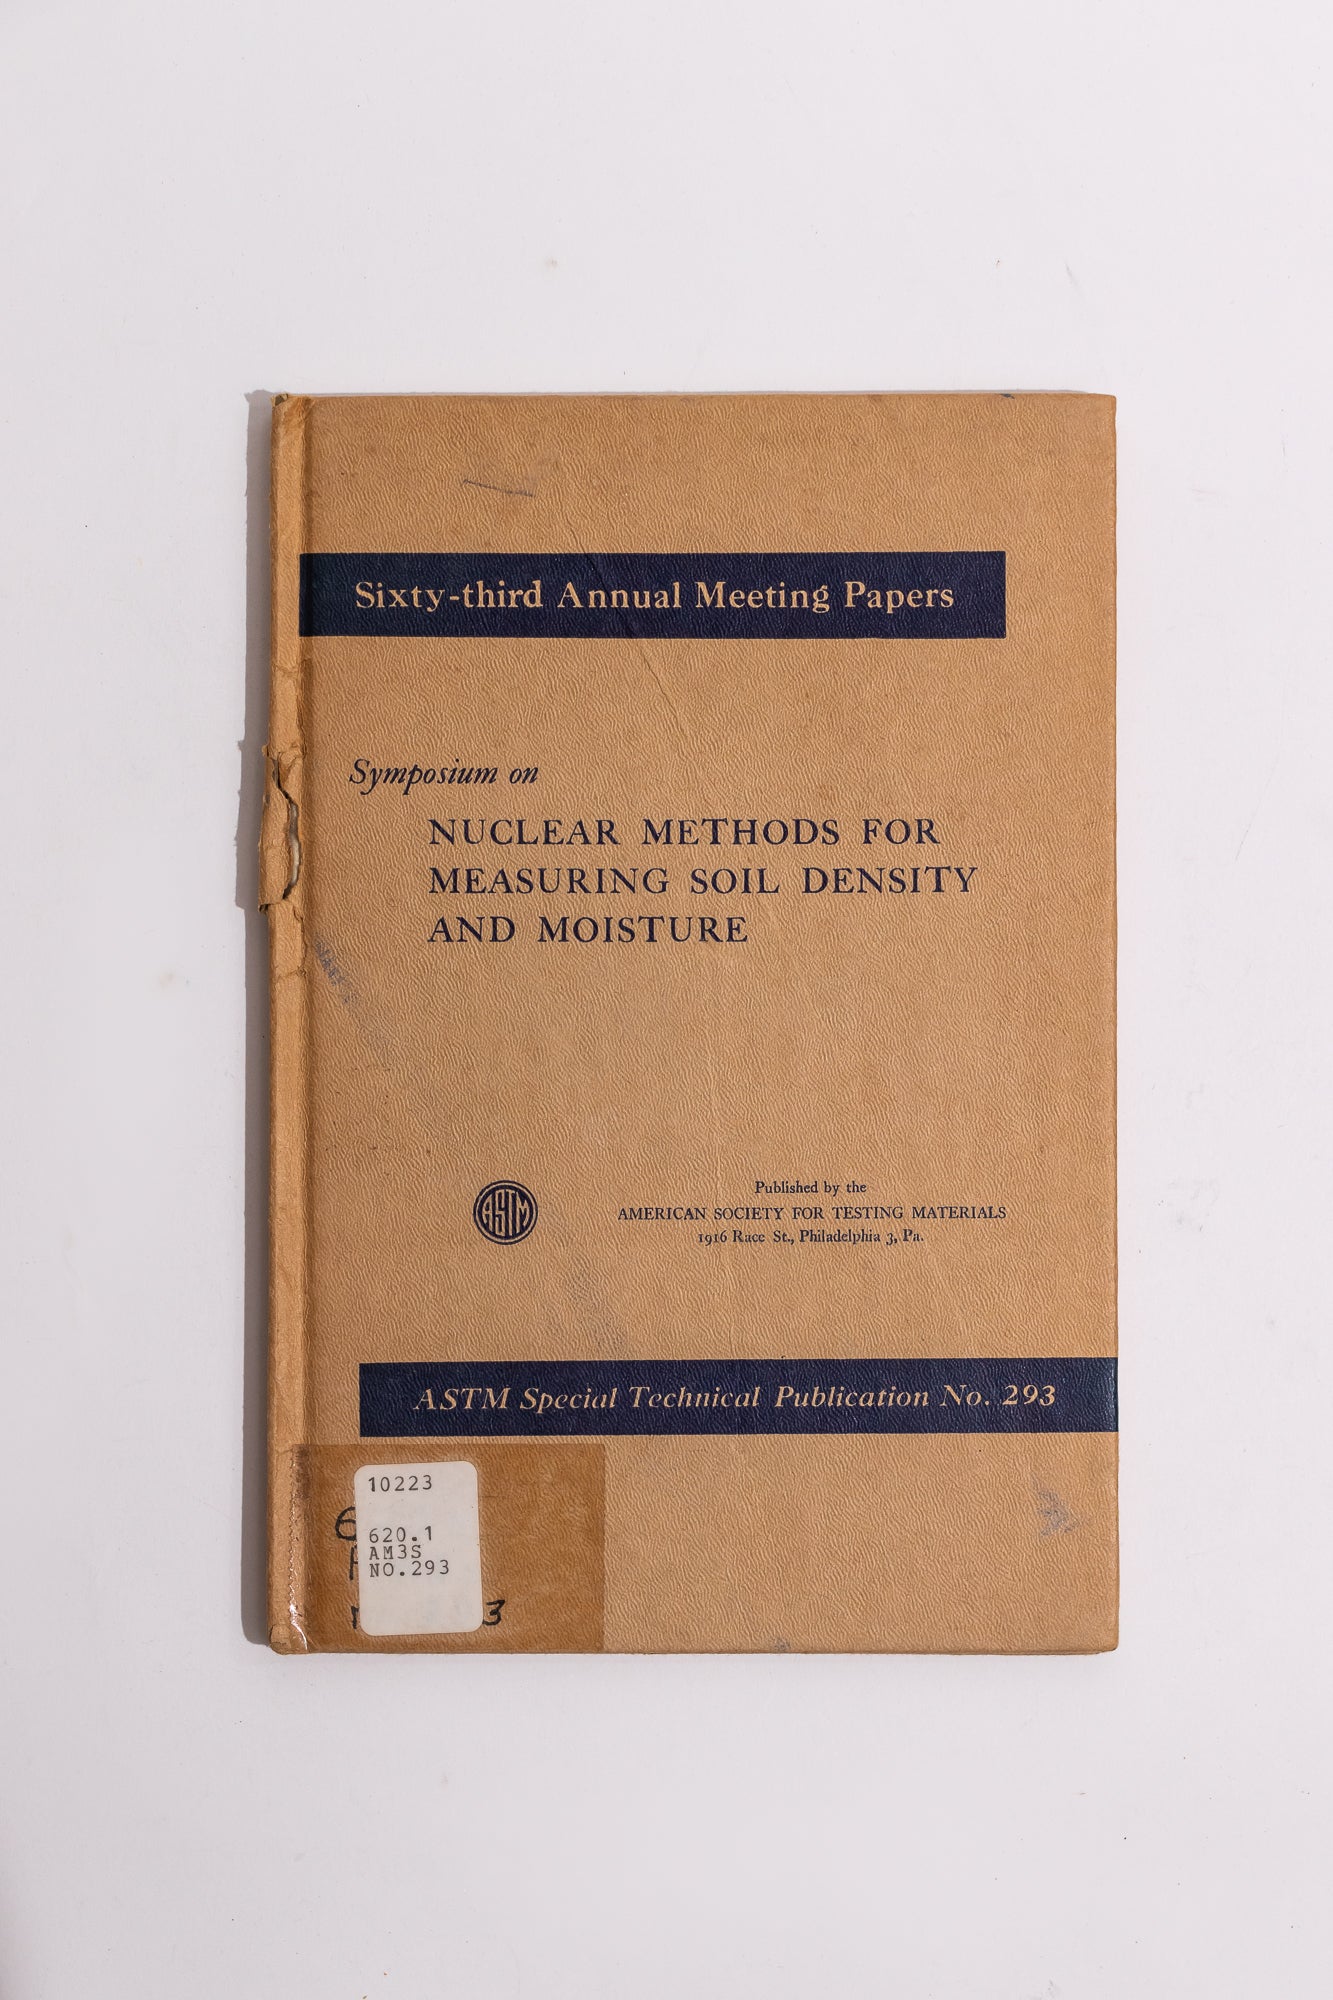 Symposium on Nuclear Methods for Measuring Soil Density and Moisture